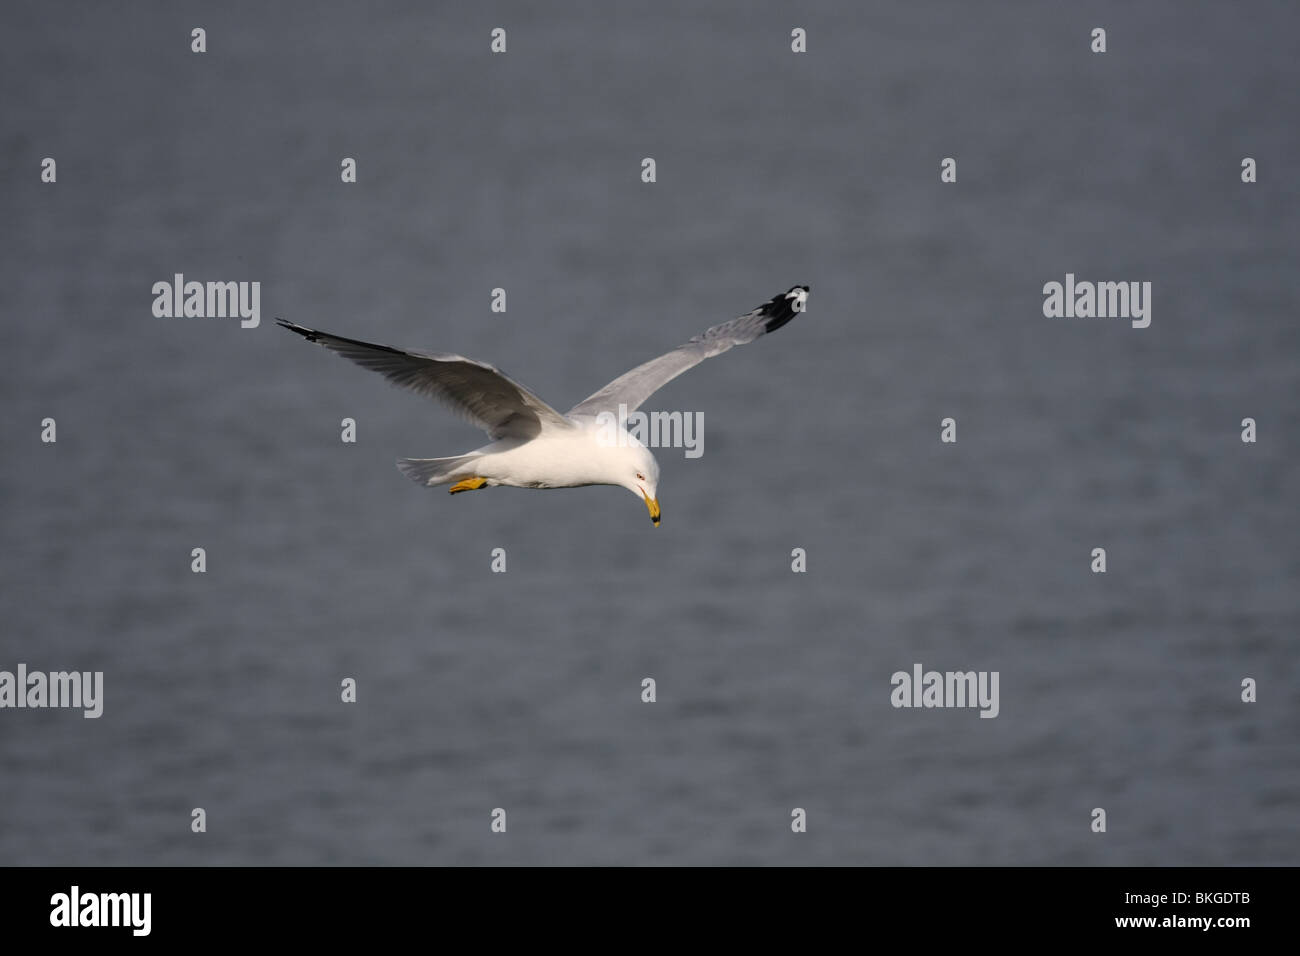 white grey seagull gull bird fly flying flight wing wings sky blue cloudy sunny larus Stock Photo